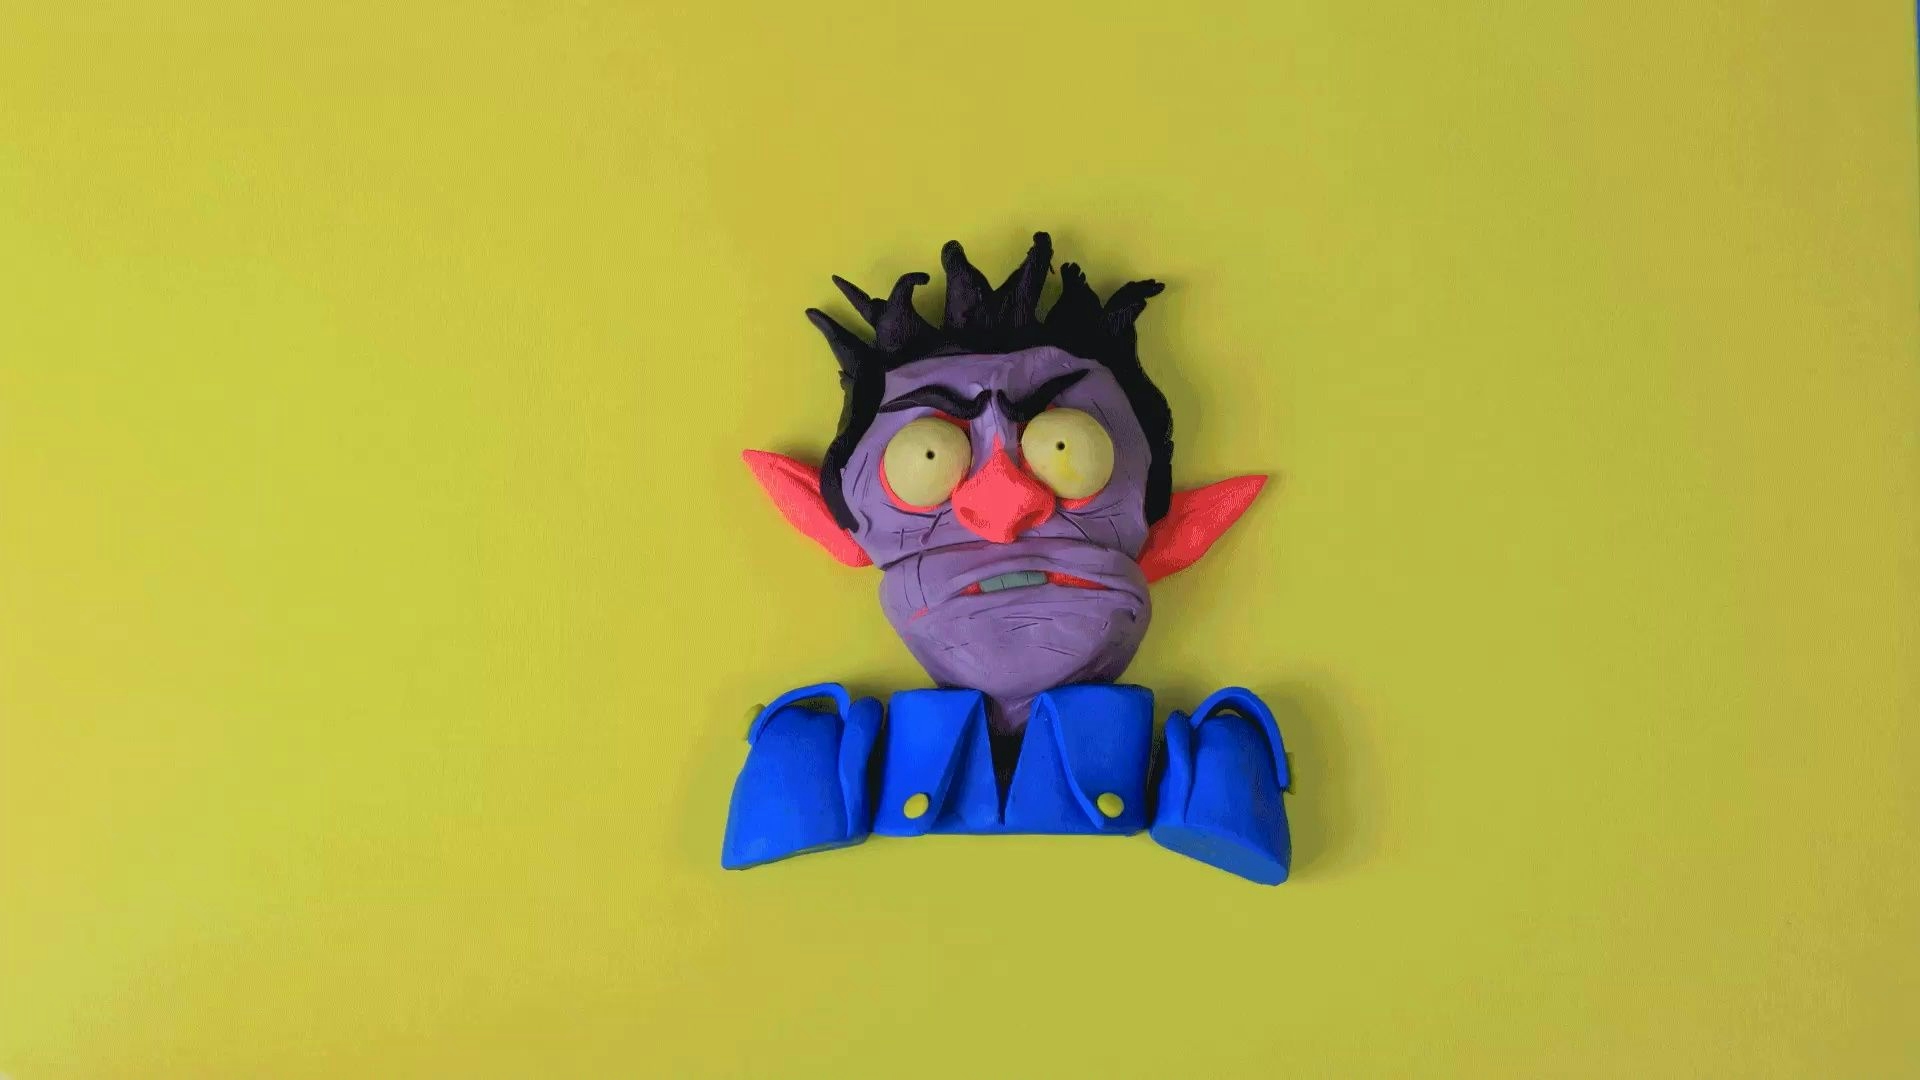 Deaton Chris Anthony "iScream" music video claymation figure on yellow